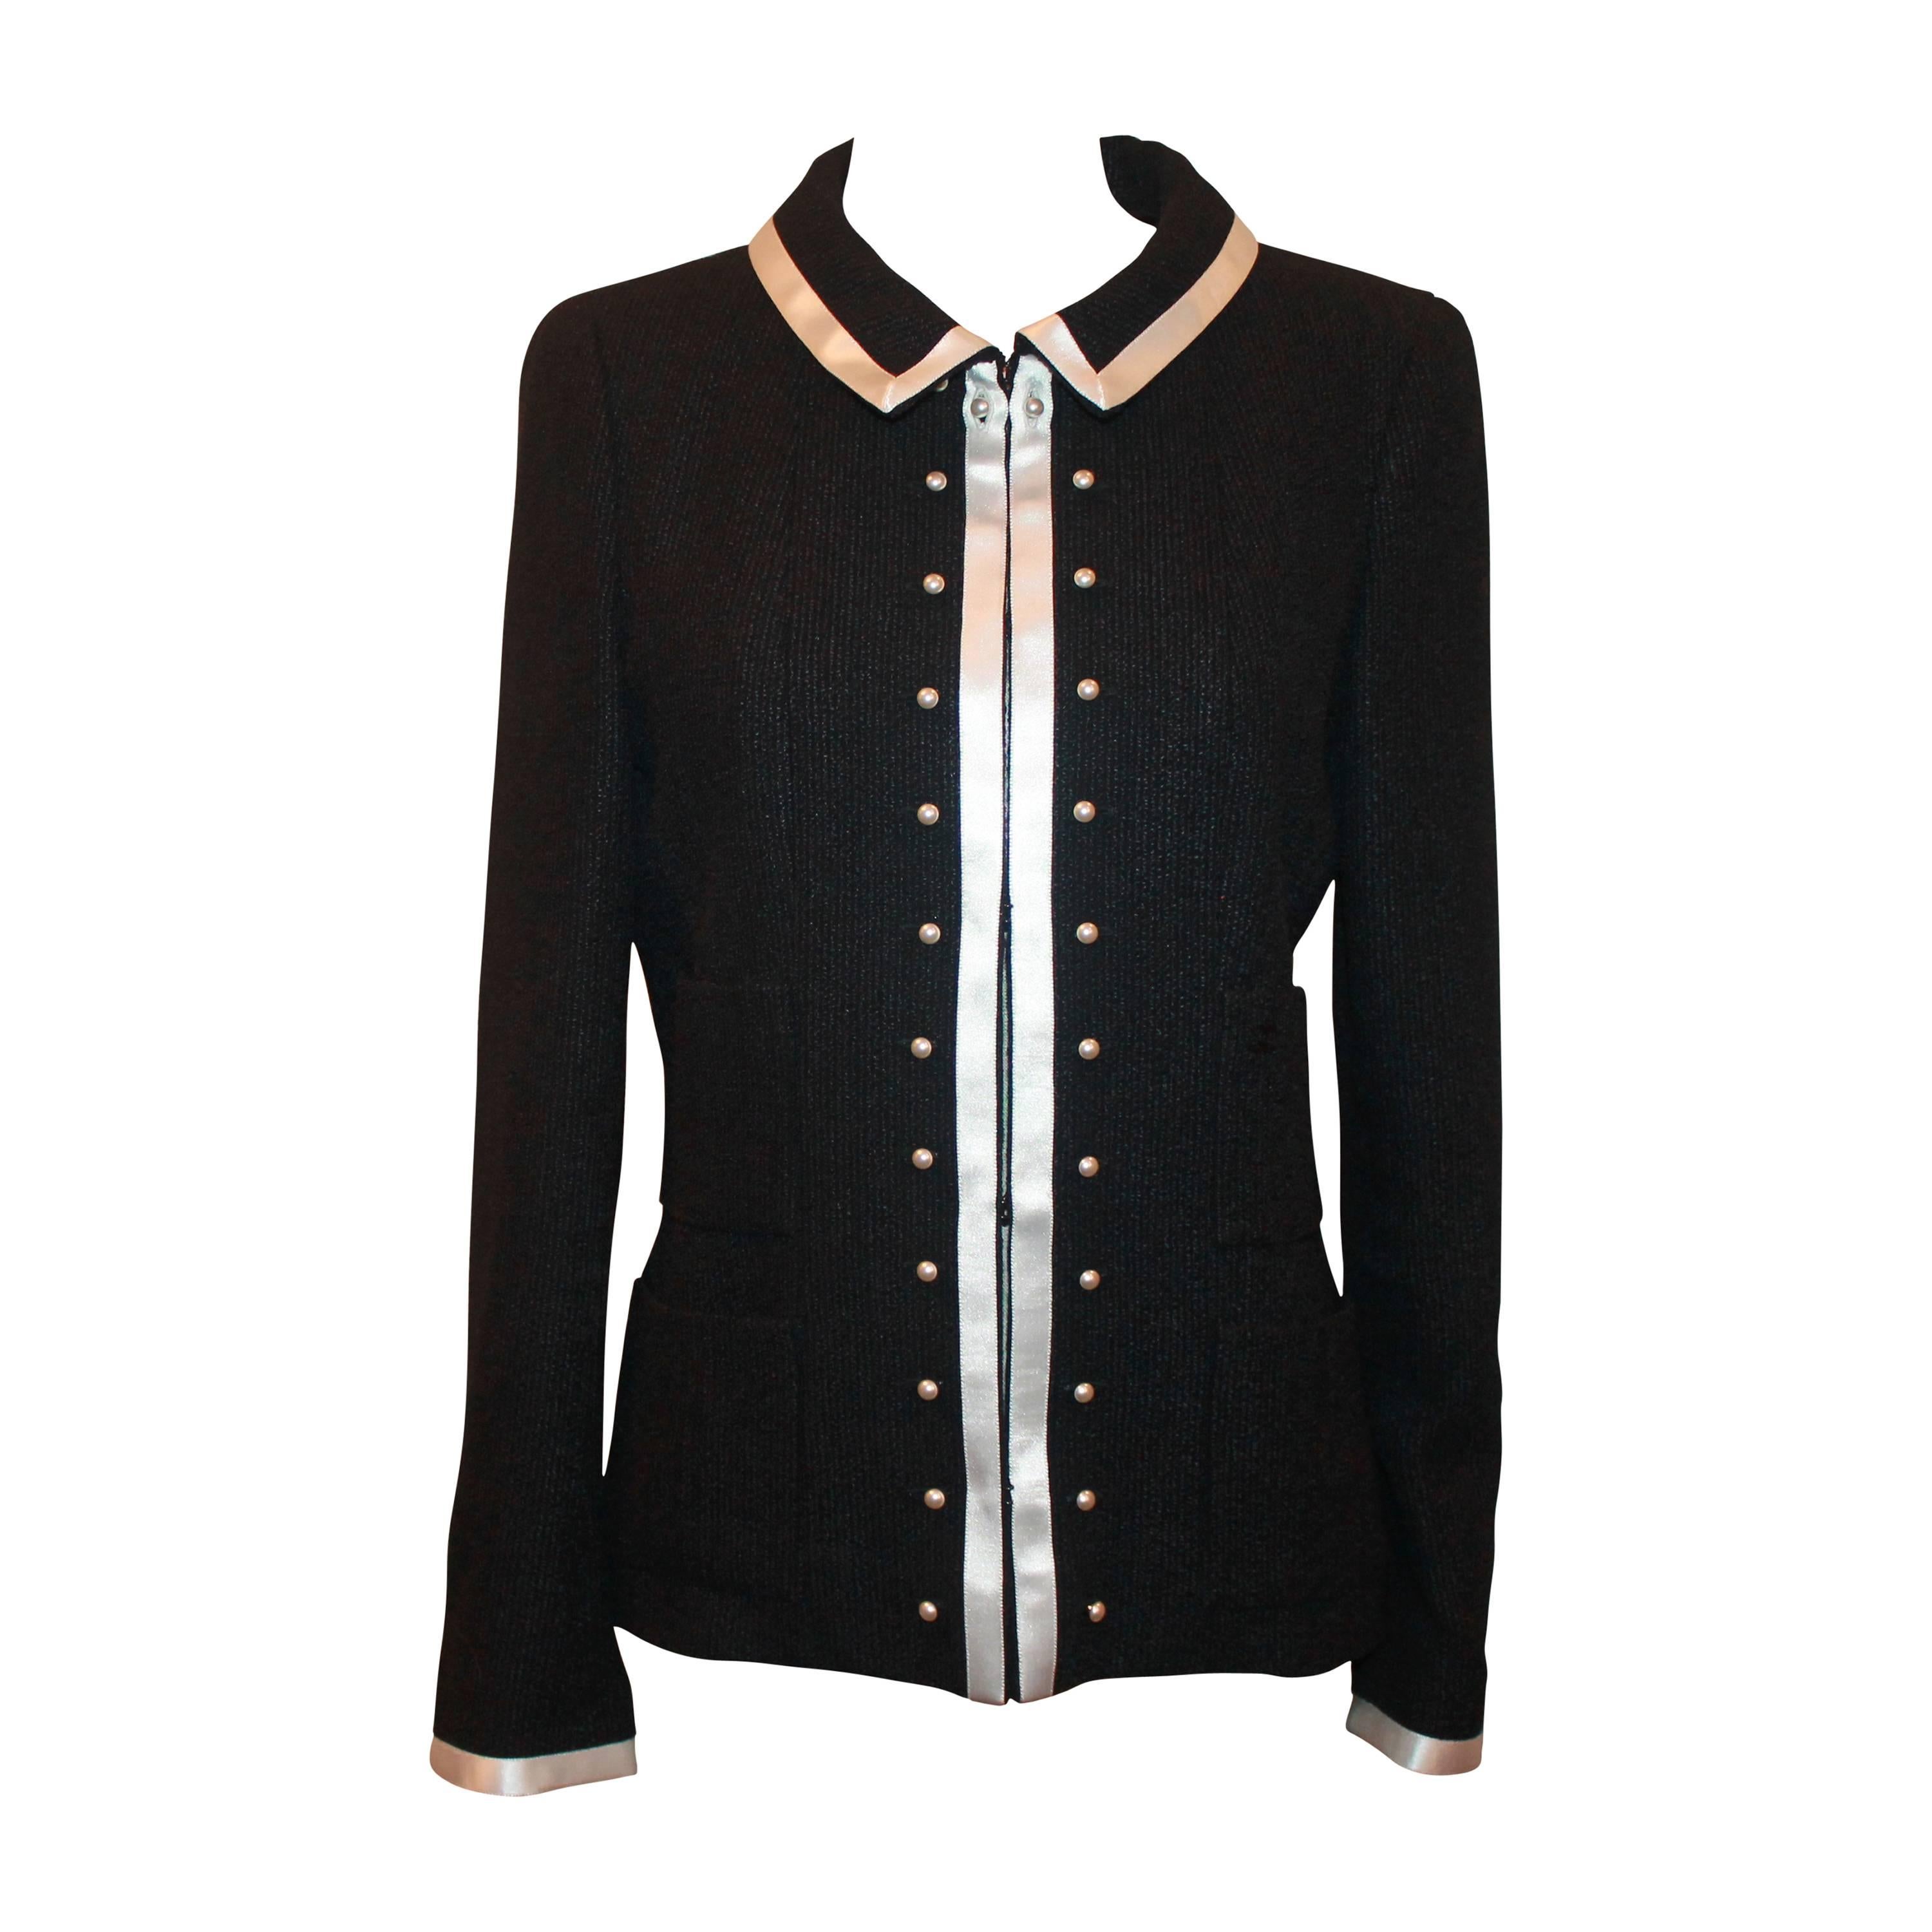 2004 Chanel Black 4-Pocket Jacket with White Ribbon Trim and Pearls - 40